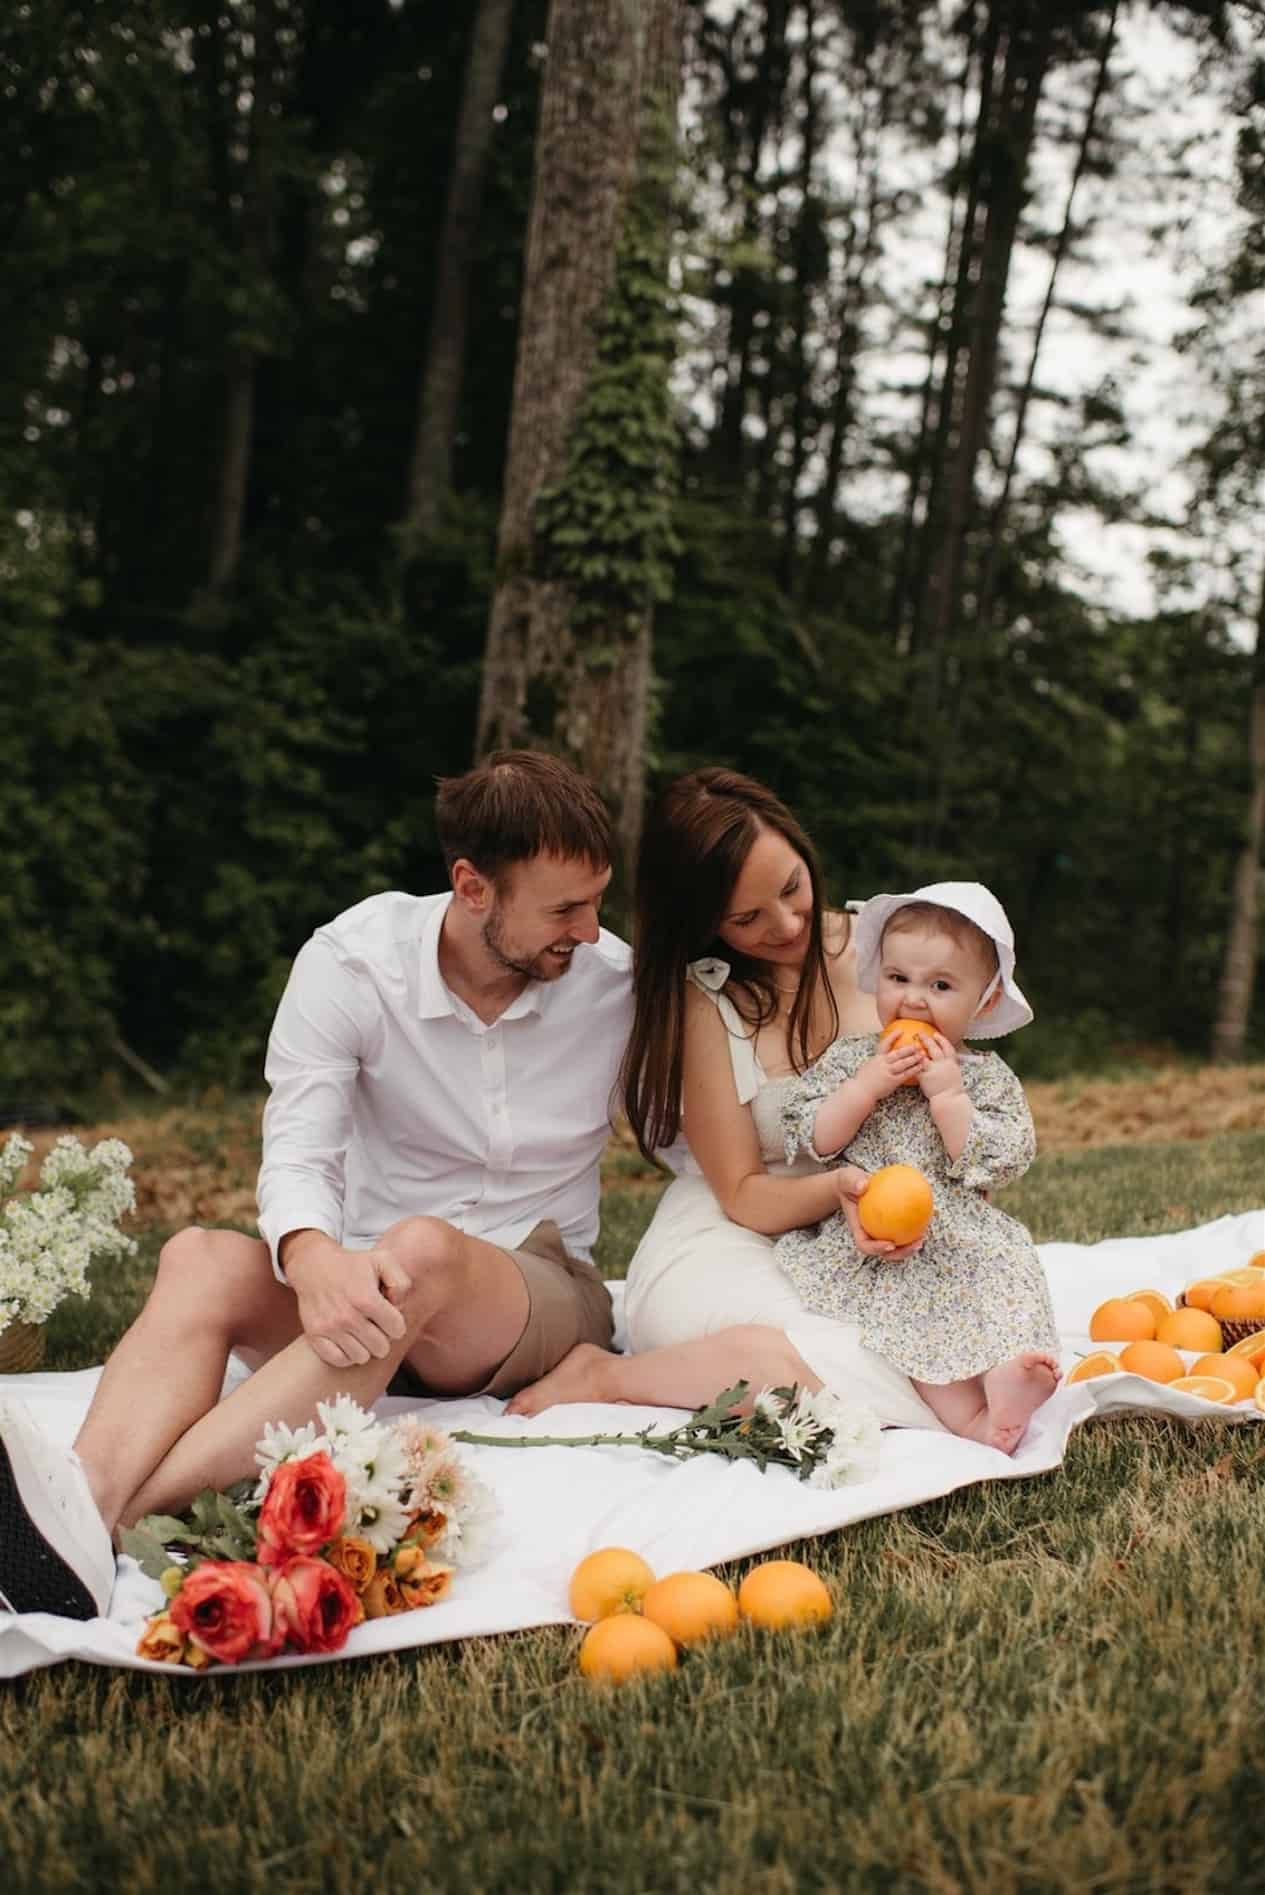 image of a small family having a picnic in the summer, wearing neutral color tones and eating oranges